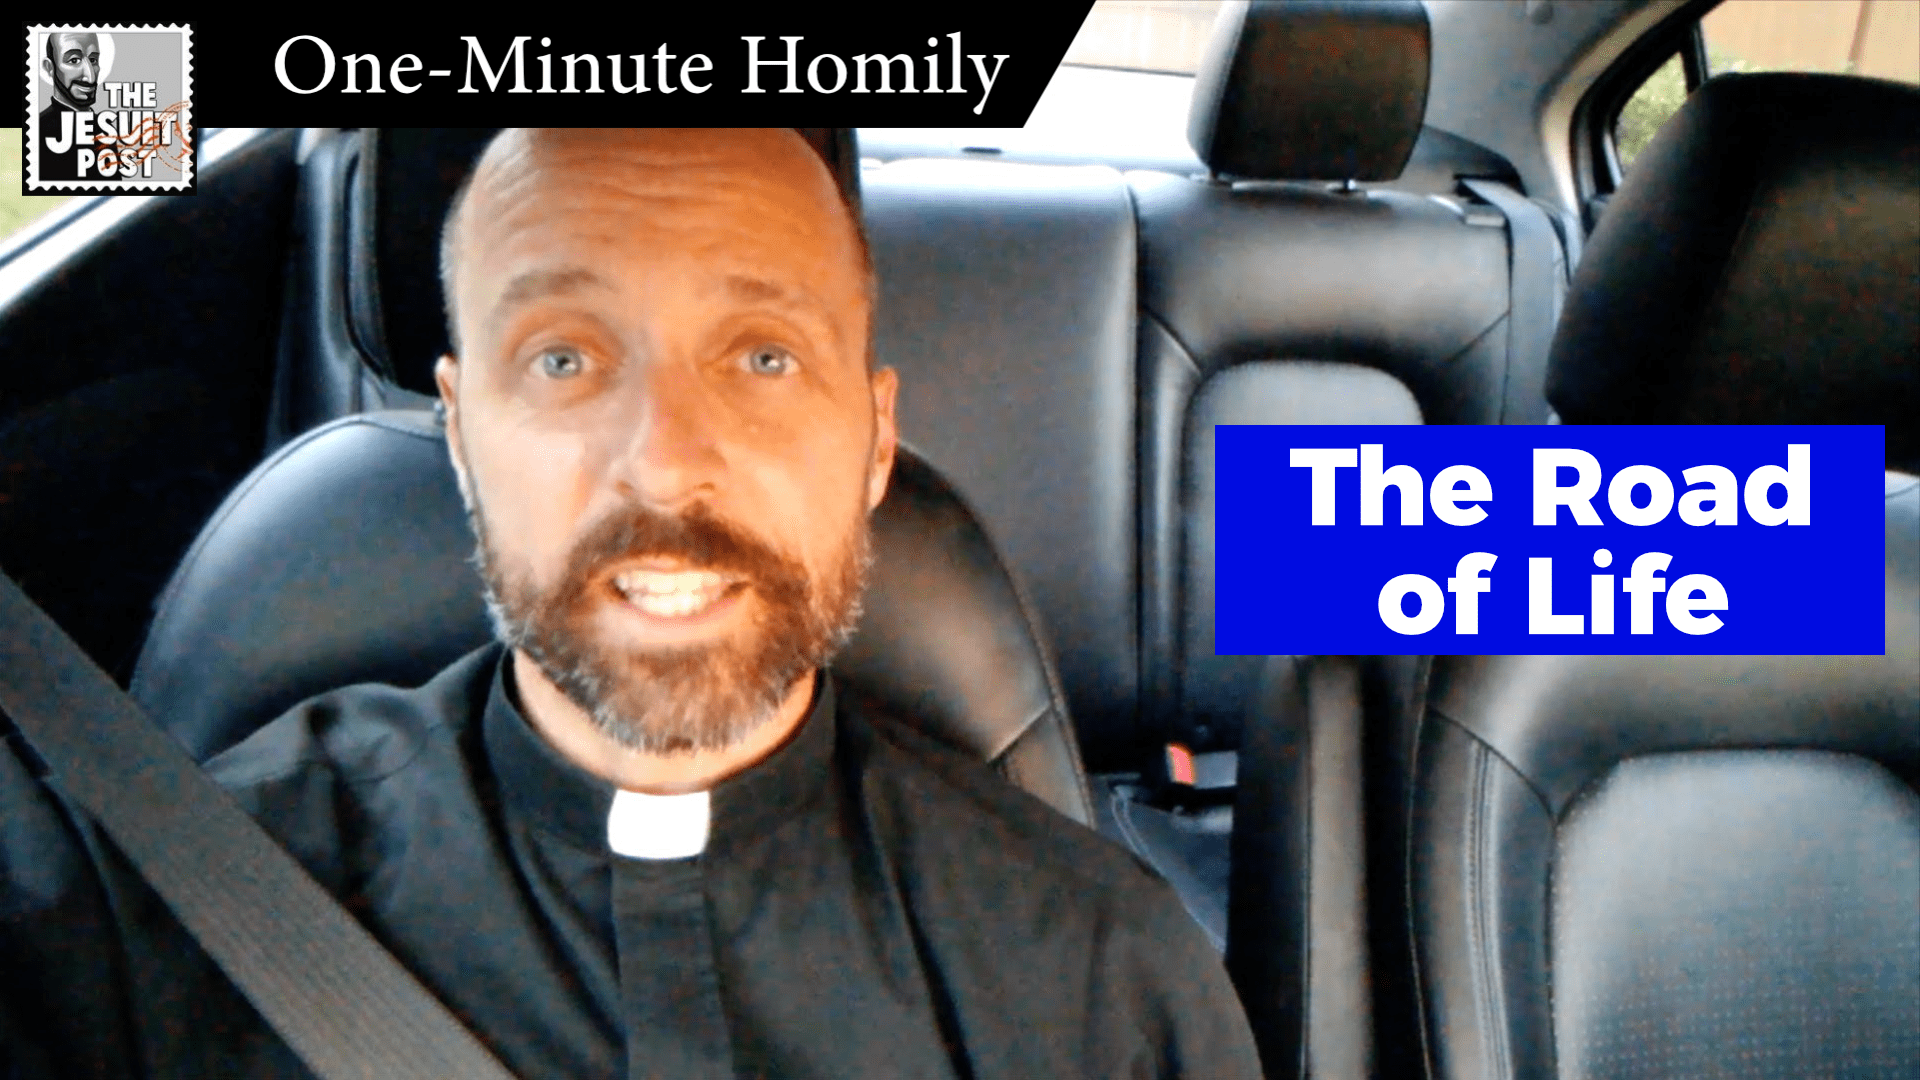 One-Minute Homily: “The Road of Life”